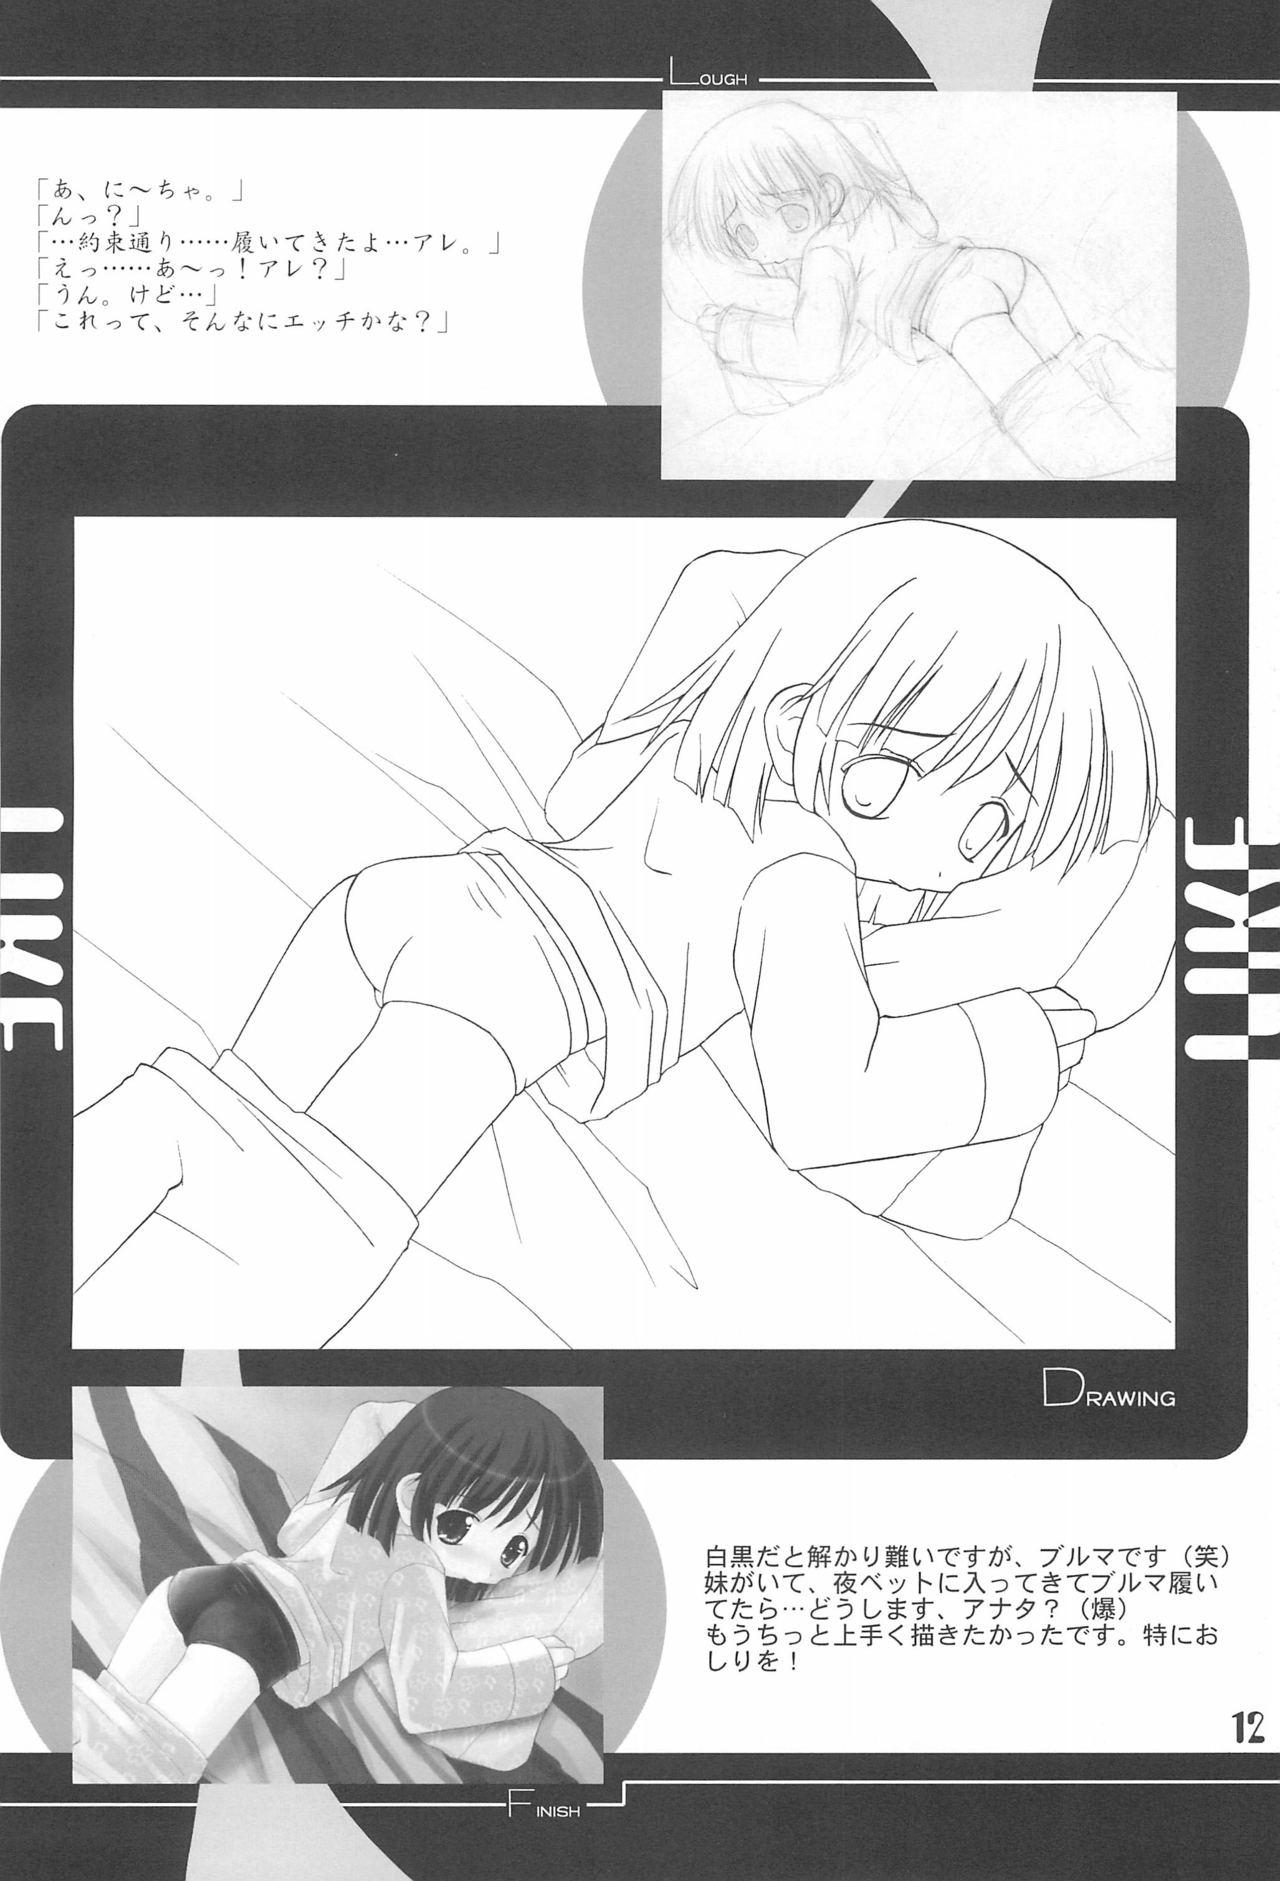 Hunks (C59) [Oden-ya (Misooden)] LIKE 1-2-3+ Imouto - Original Jerking - Page 12